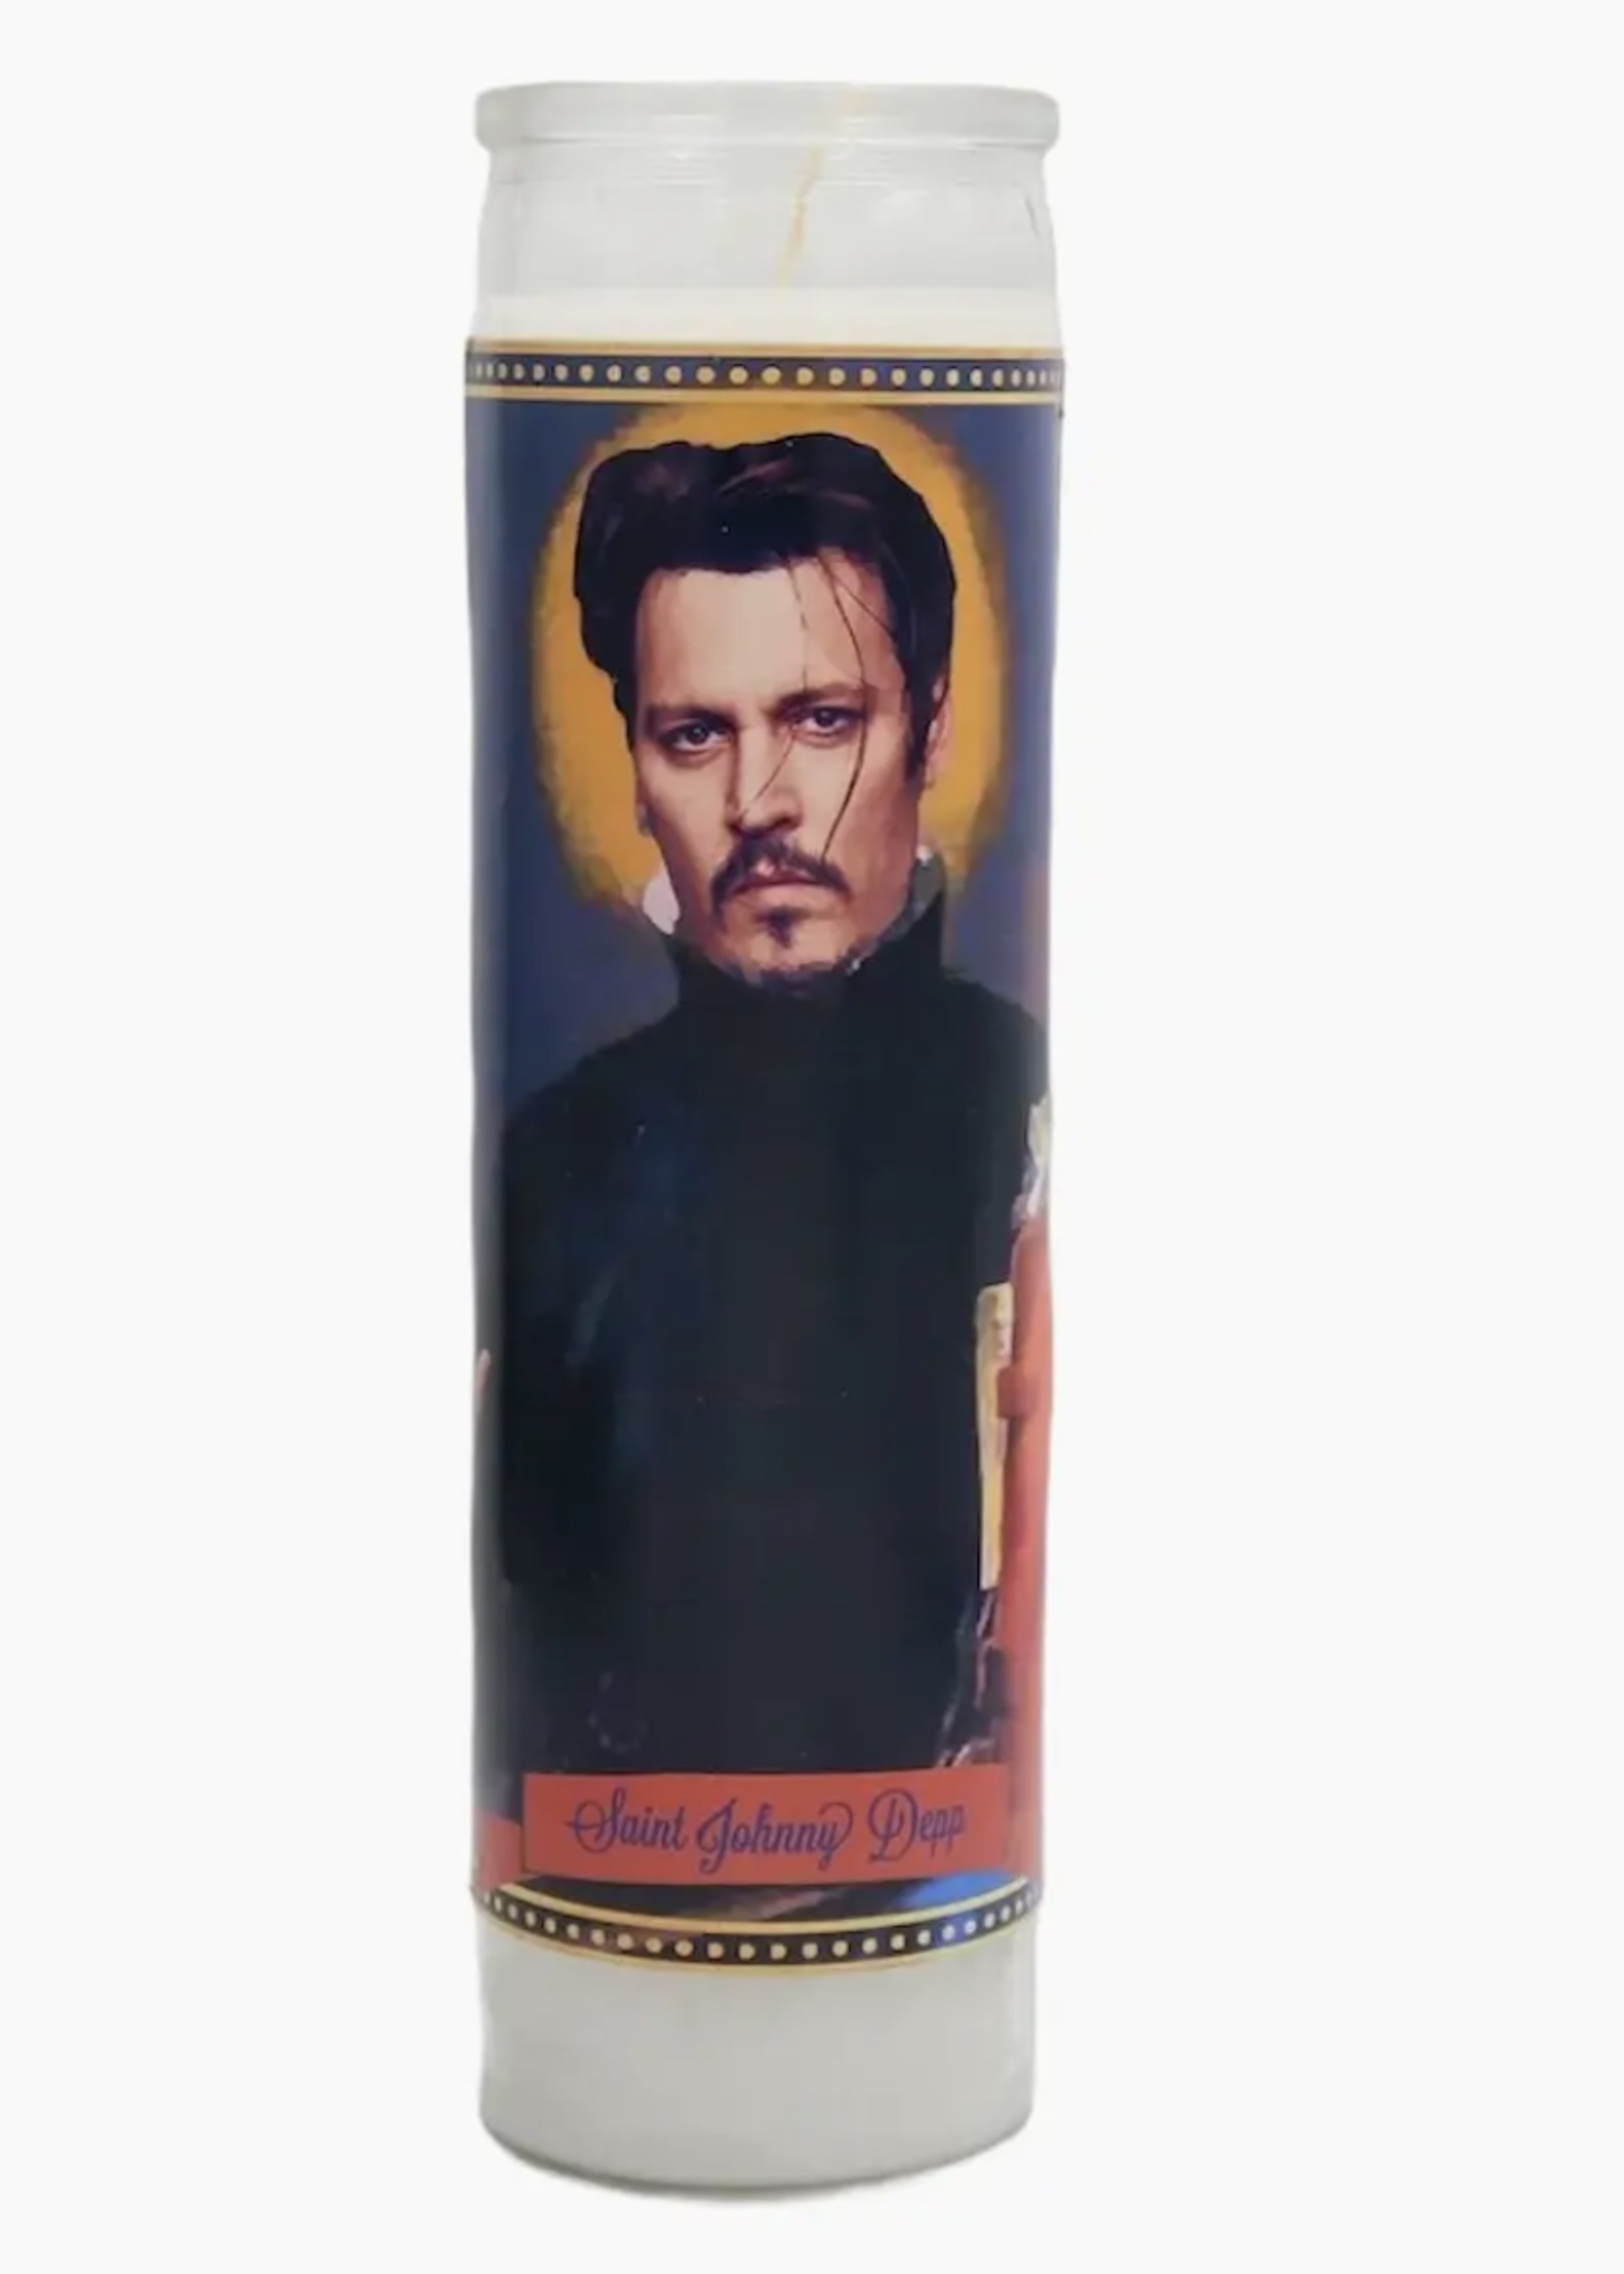 The Luminary and Co. Saint Johnny Depp Ritual Candle